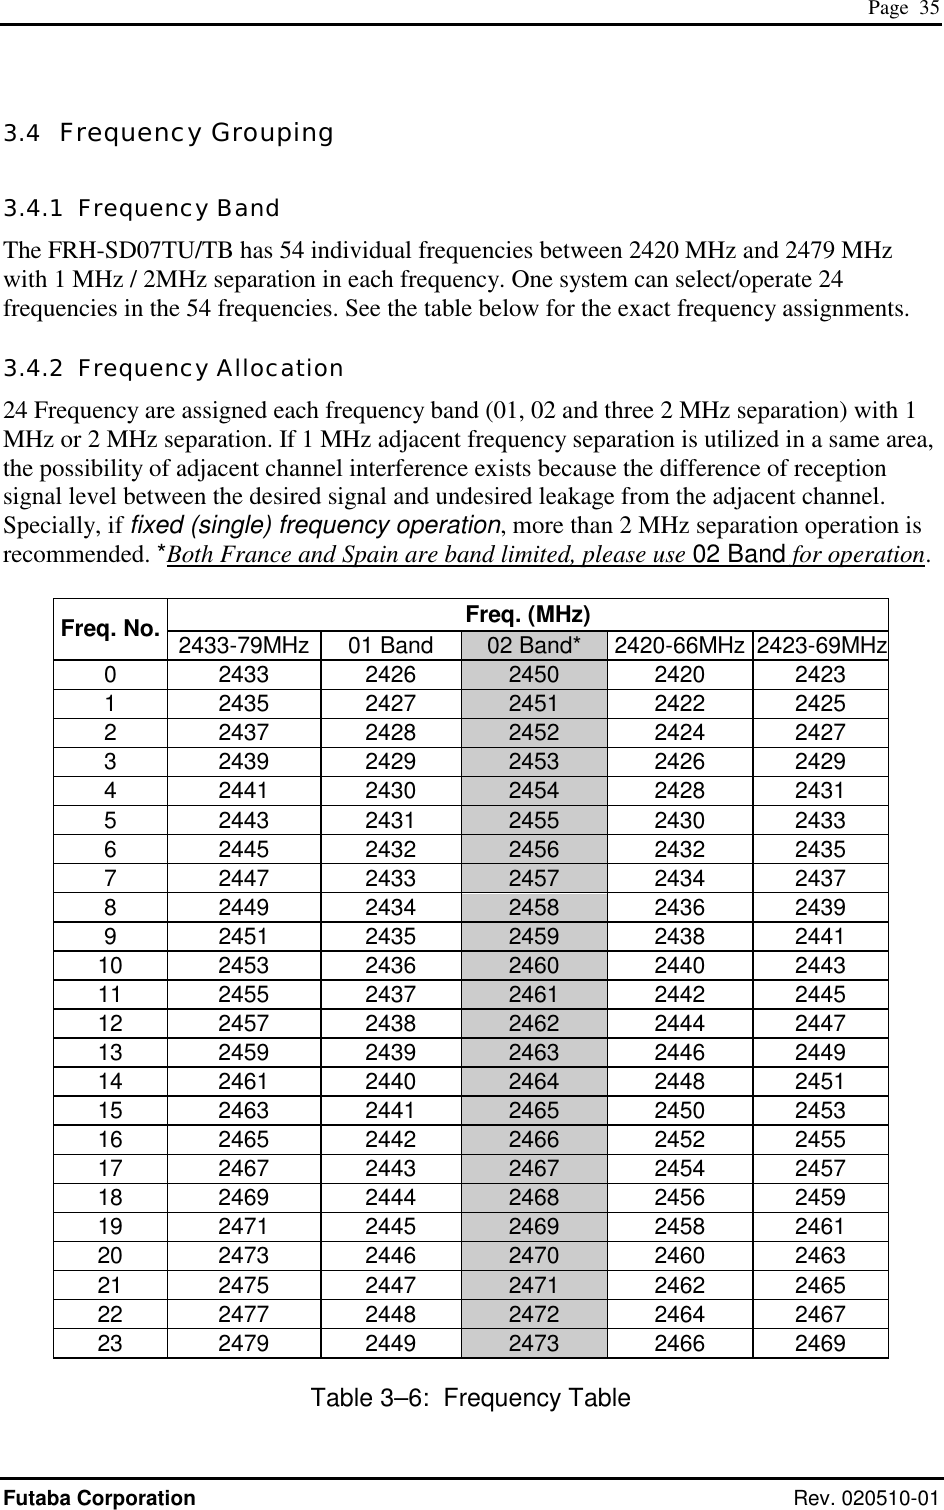  Page  35 Futaba Corporation Rev. 020510-01 3.4  Frequency Grouping 3.4.1  Frequency Band The FRH-SD07TU/TB has 54 individual frequencies between 2420 MHz and 2479 MHz with 1 MHz / 2MHz separation in each frequency. One system can select/operate 24 frequencies in the 54 frequencies. See the table below for the exact frequency assignments. 3.4.2  Frequency Allocation 24 Frequency are assigned each frequency band (01, 02 and three 2 MHz separation) with 1 MHz or 2 MHz separation. If 1 MHz adjacent frequency separation is utilized in a same area, the possibility of adjacent channel interference exists because the difference of reception signal level between the desired signal and undesired leakage from the adjacent channel. Specially, if fixed (single) frequency operation, more than 2 MHz separation operation is recommended. *Both France and Spain are band limited, please use 02 Band for operation.  Freq. (MHz) Freq. No.  2433-79MHz 01 Band  02 Band*  2420-66MHz 2423-69MHz 0 2433 2426 2450  2420 2423 1 2435 2427 2451  2422 2425 2 2437 2428 2452  2424 2427 3 2439 2429 2453  2426 2429 4 2441 2430 2454  2428 2431 5 2443 2431 2455  2430 2433 6 2445 2432 2456  2432 2435 7 2447 2433 2457  2434 2437 8 2449 2434 2458  2436 2439 9 2451 2435 2459  2438 2441 10 2453 2436 2460  2440 2443 11 2455 2437 2461  2442 2445 12 2457 2438 2462  2444 2447 13 2459 2439 2463  2446 2449 14 2461 2440 2464  2448 2451 15 2463 2441 2465  2450 2453 16 2465 2442 2466  2452 2455 17 2467 2443 2467  2454 2457 18 2469 2444 2468  2456 2459 19 2471 2445 2469  2458 2461 20 2473 2446 2470  2460 2463 21 2475 2447 2471  2462 2465 22 2477 2448 2472  2464 2467 23 2479 2449 2473  2466 2469 Table 3–6:  Frequency Table 